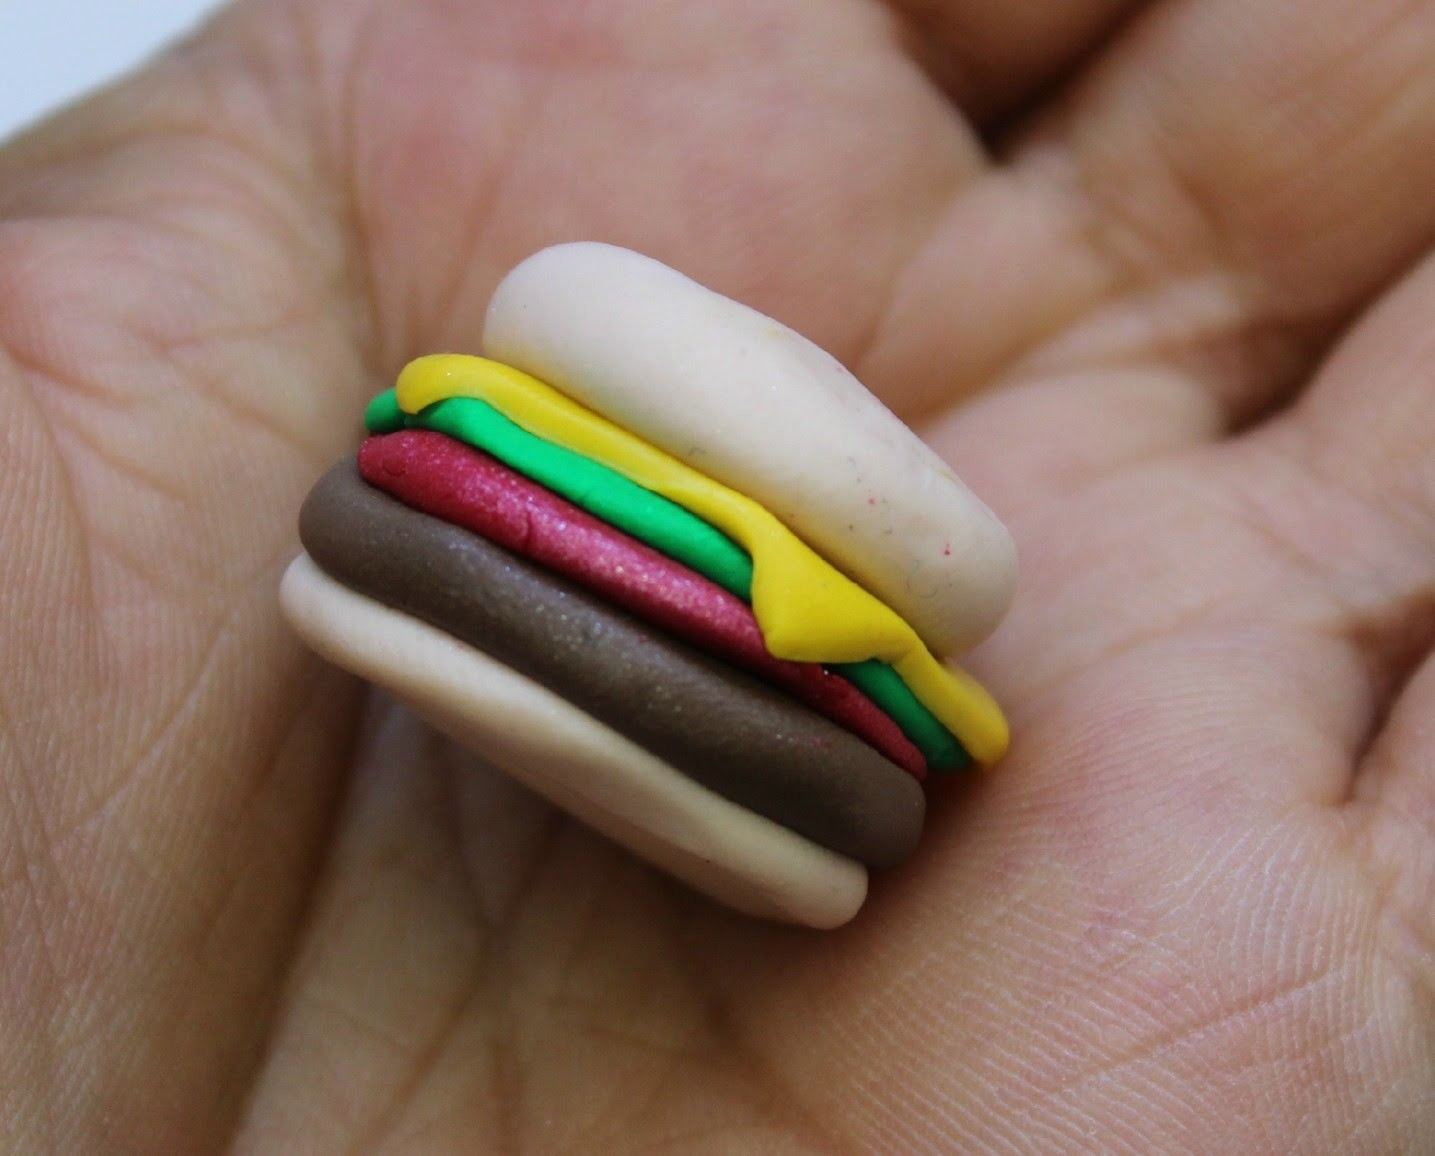 How to make Polymer clay hamburger (stitchmarker or other jewelry)